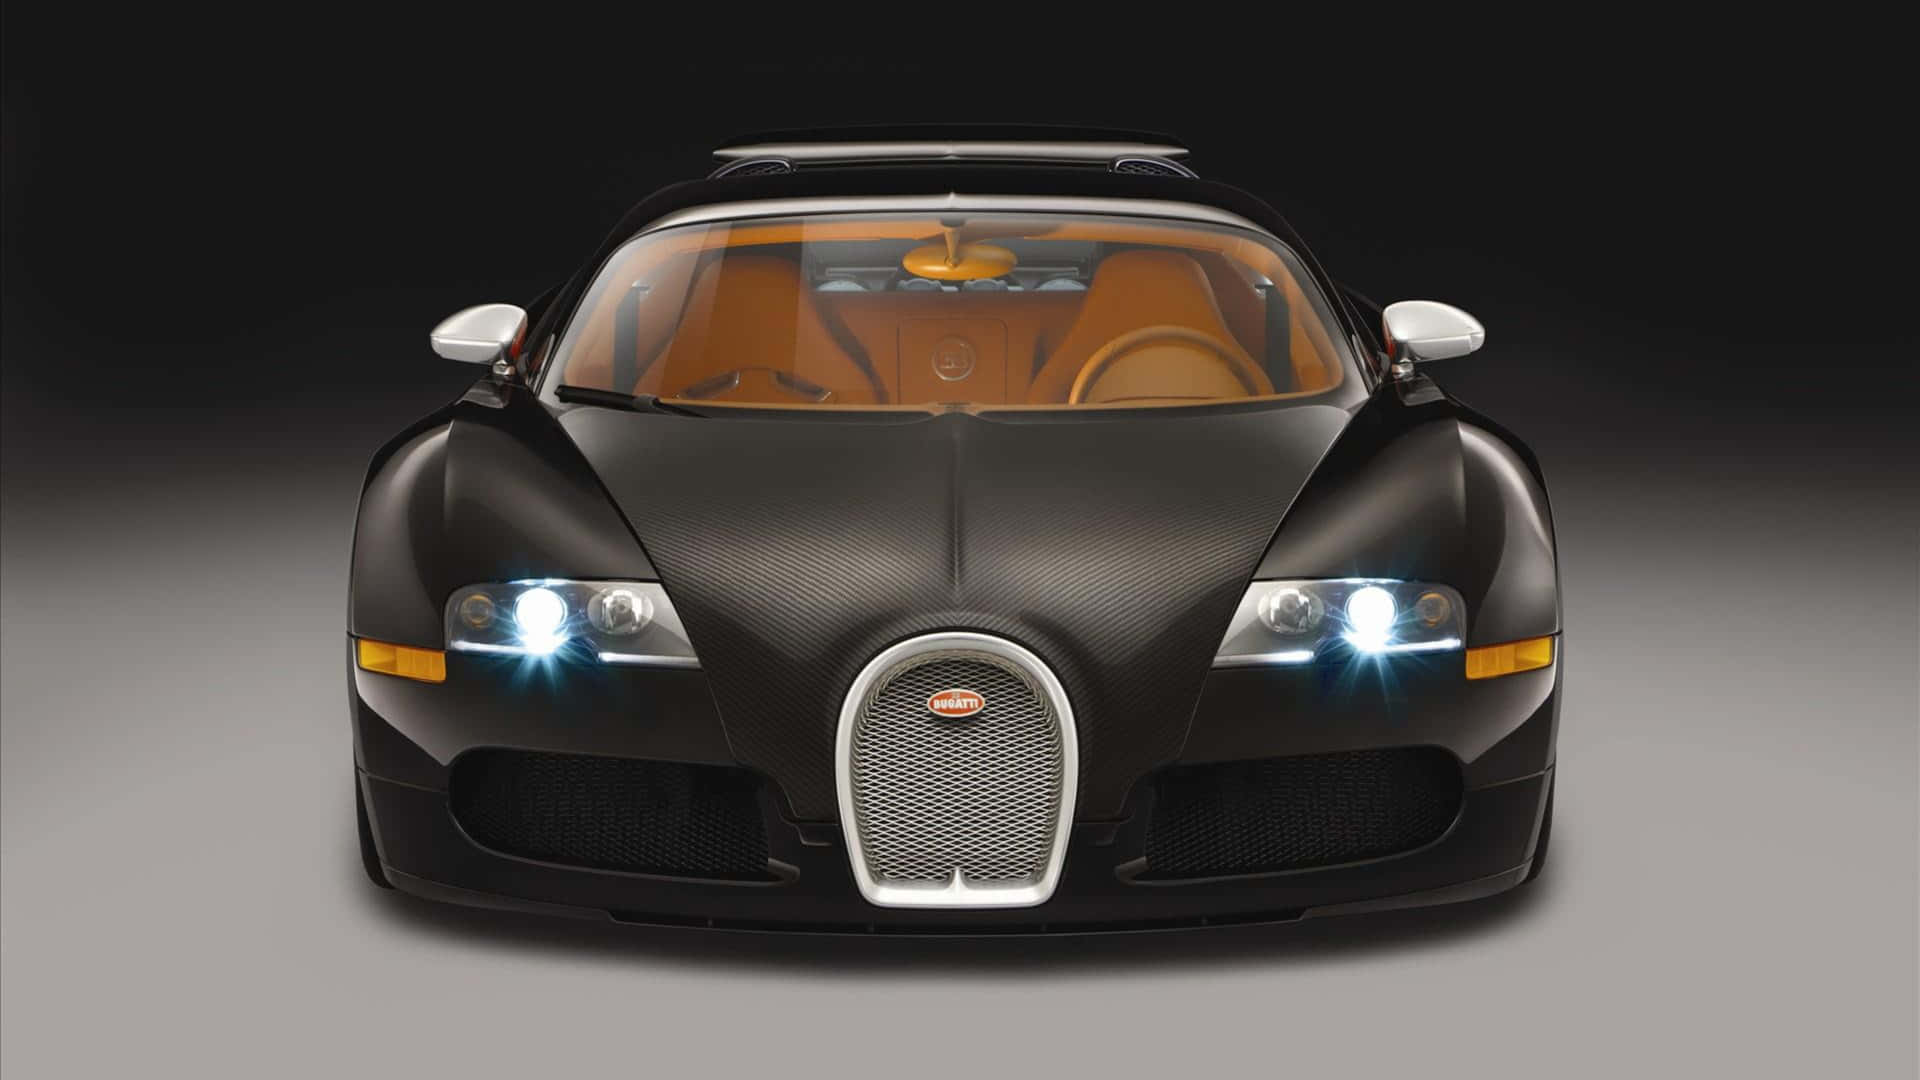 Check out this jaw-dropping, aerodynamic red and black Bugatti Wallpaper